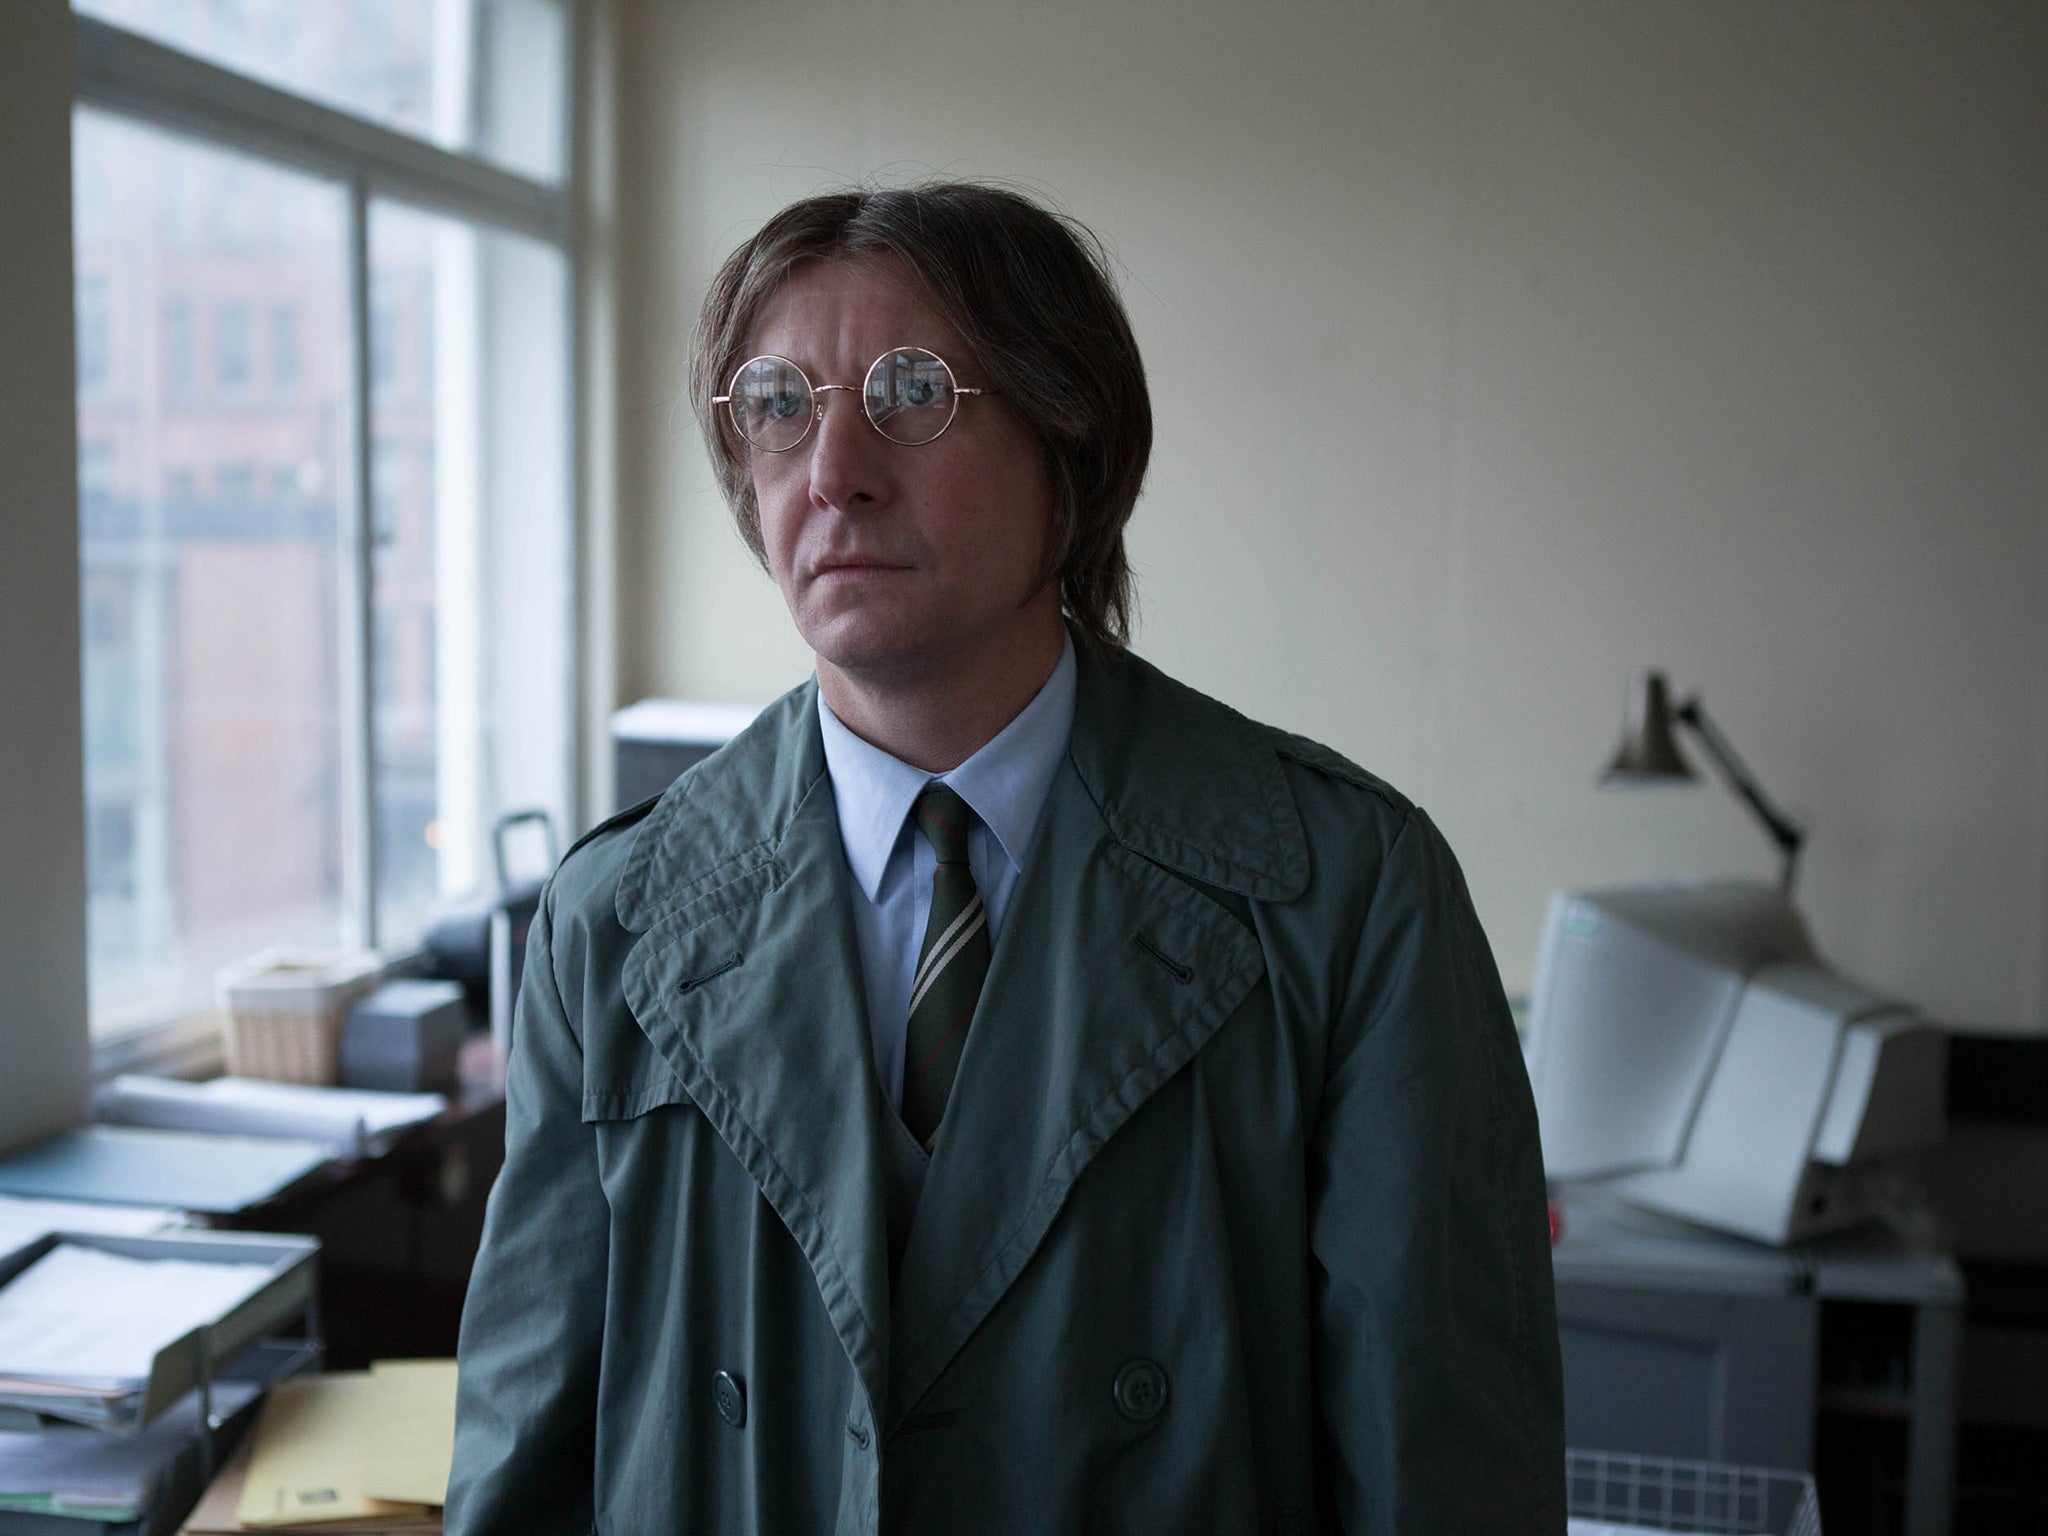 The Liverpool actor Ian Hart has played John Lennon on three other occasions